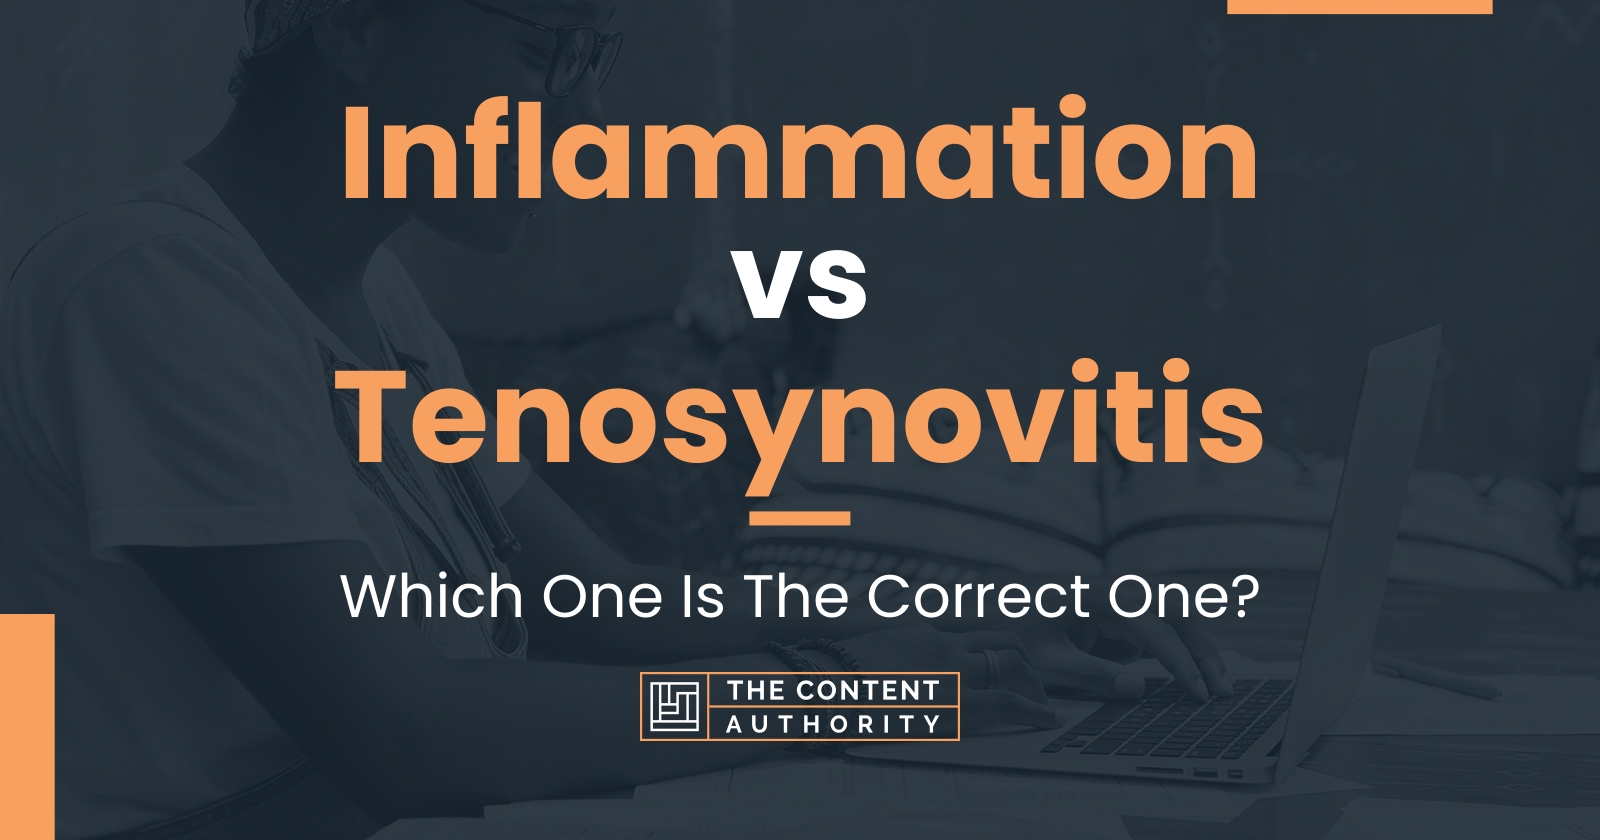 Inflammation vs Tenosynovitis: Which One Is The Correct One?